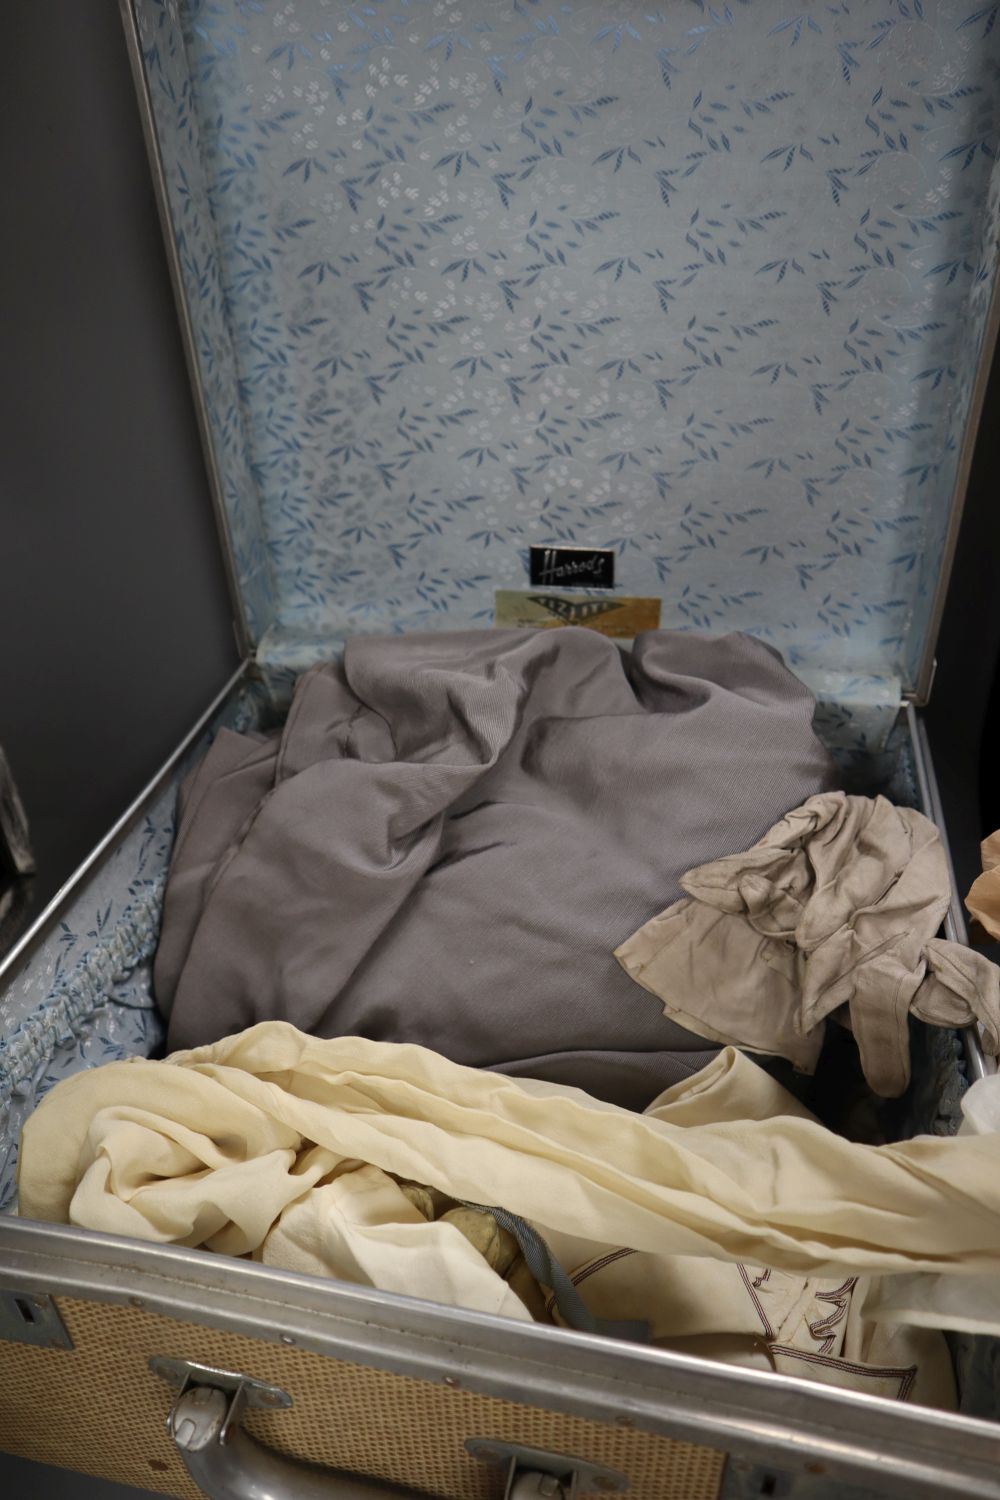 A Harrods suitcase containing 1900-40s cream chiffon and silk blouses, etc and a petit point bag